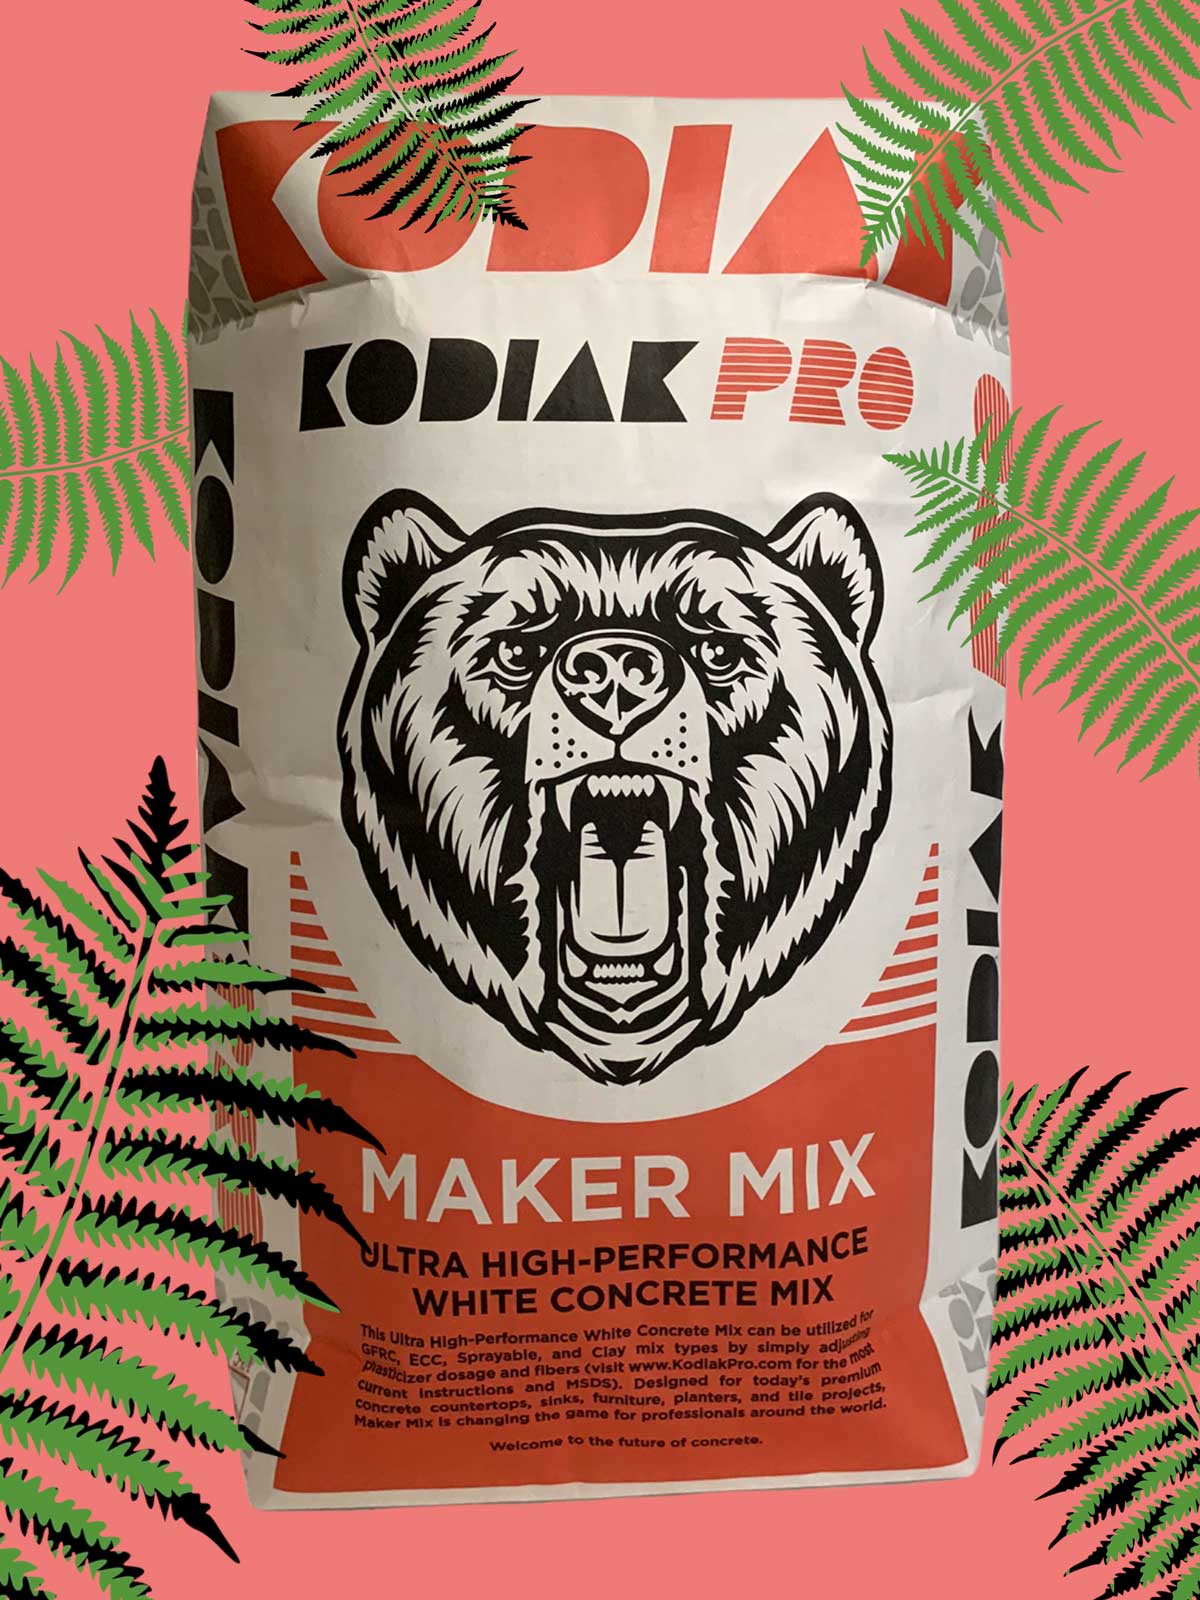 Kodiak Pro Maker Mix is great for SCC GFRC concrete sinks and countertops